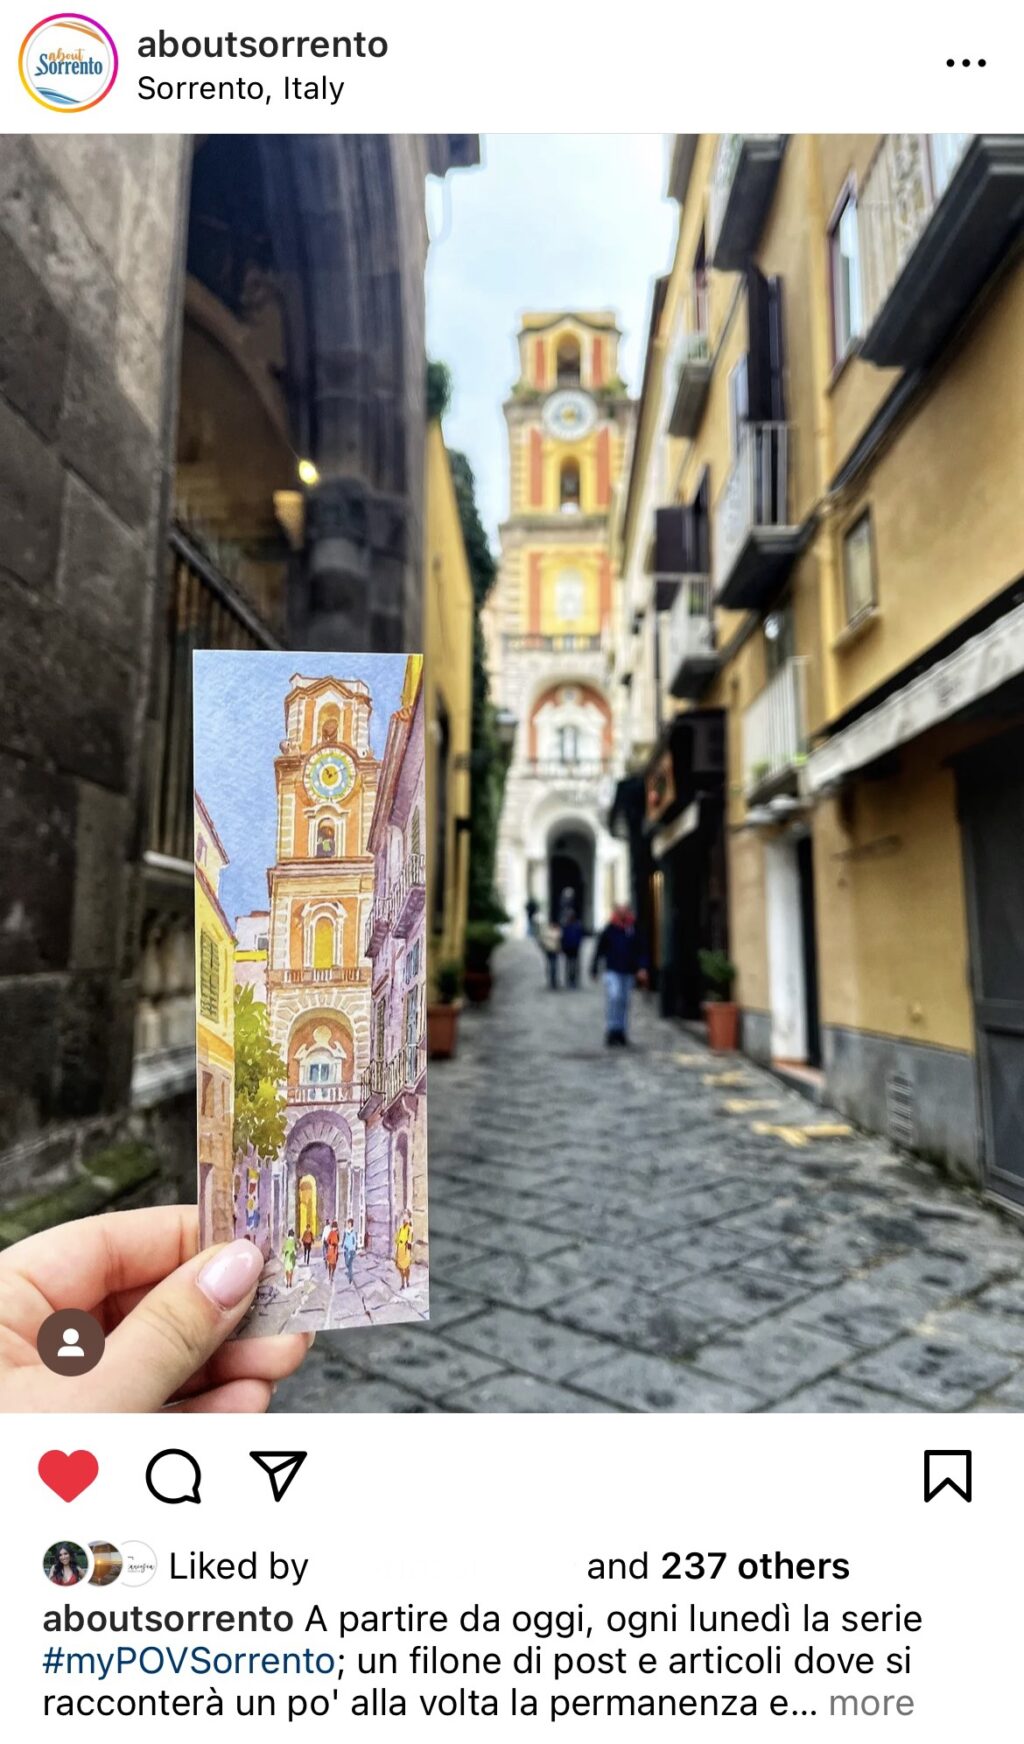 A screenshot of an Instagram post from AboutSorrento shows a narrow city street leading to the bell tower of the Sorrento Cathedral. A hand holds up a small painting of the same view.